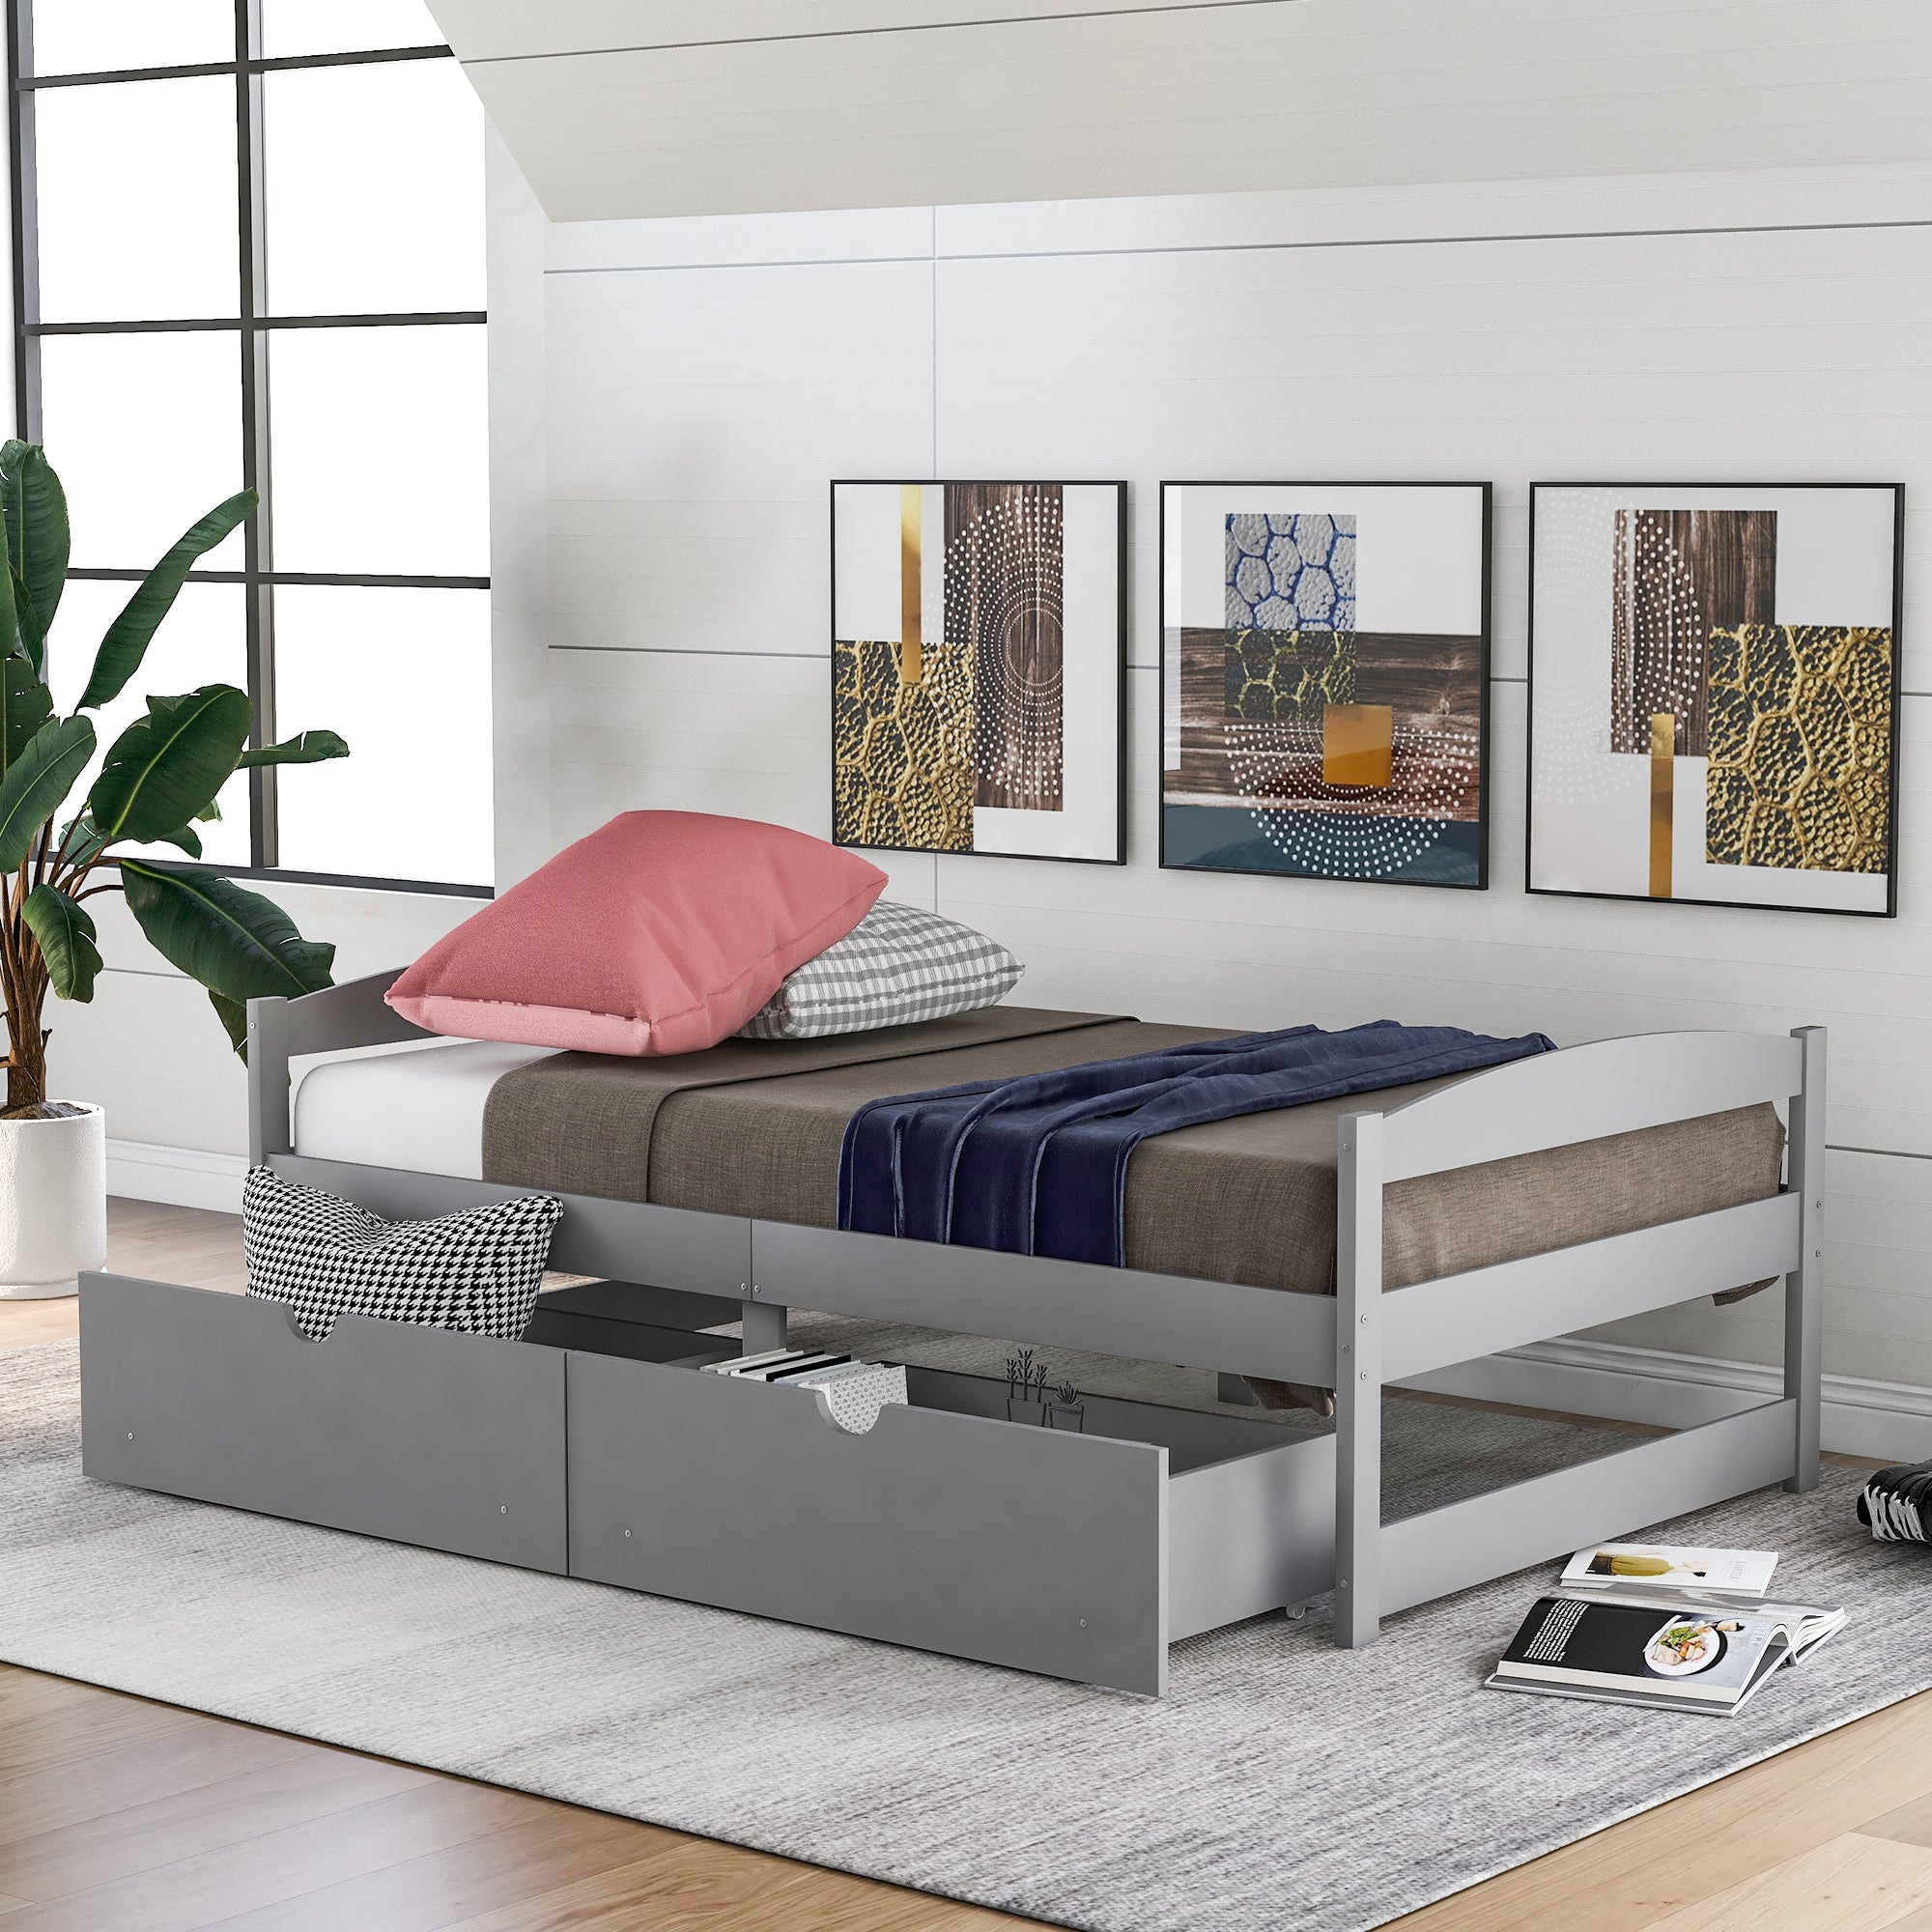 Twin size platform bed, with two drawers, gray gray-pine